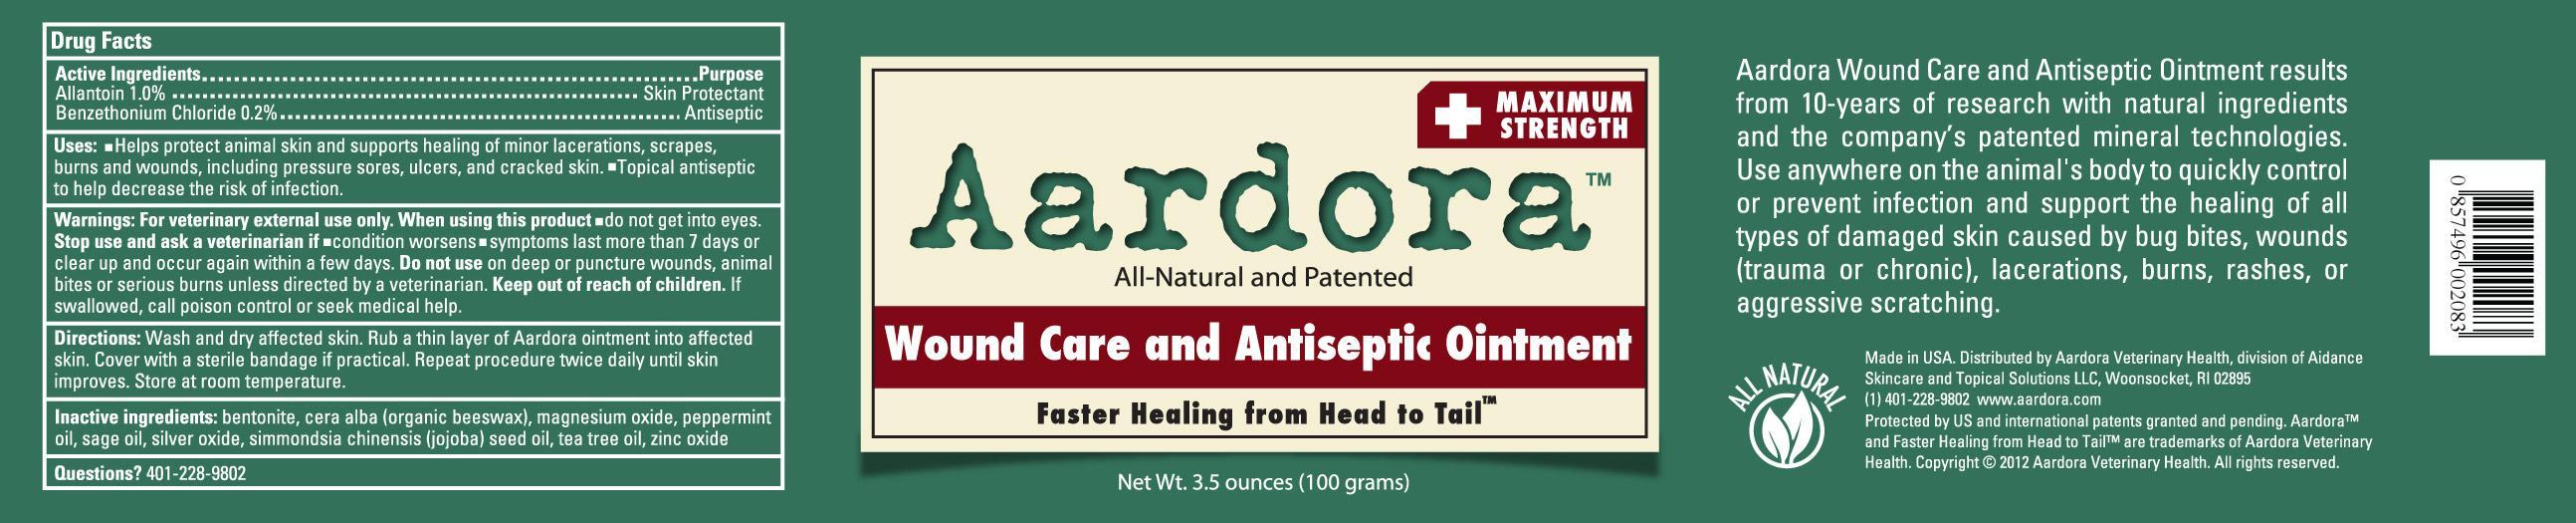 Aardora Wound Care And Antiseptic Maximum Strength (Allantoin, Benzethonium Chloride) Ointment [Aidance Skincare & Topical Solutions, Llc]